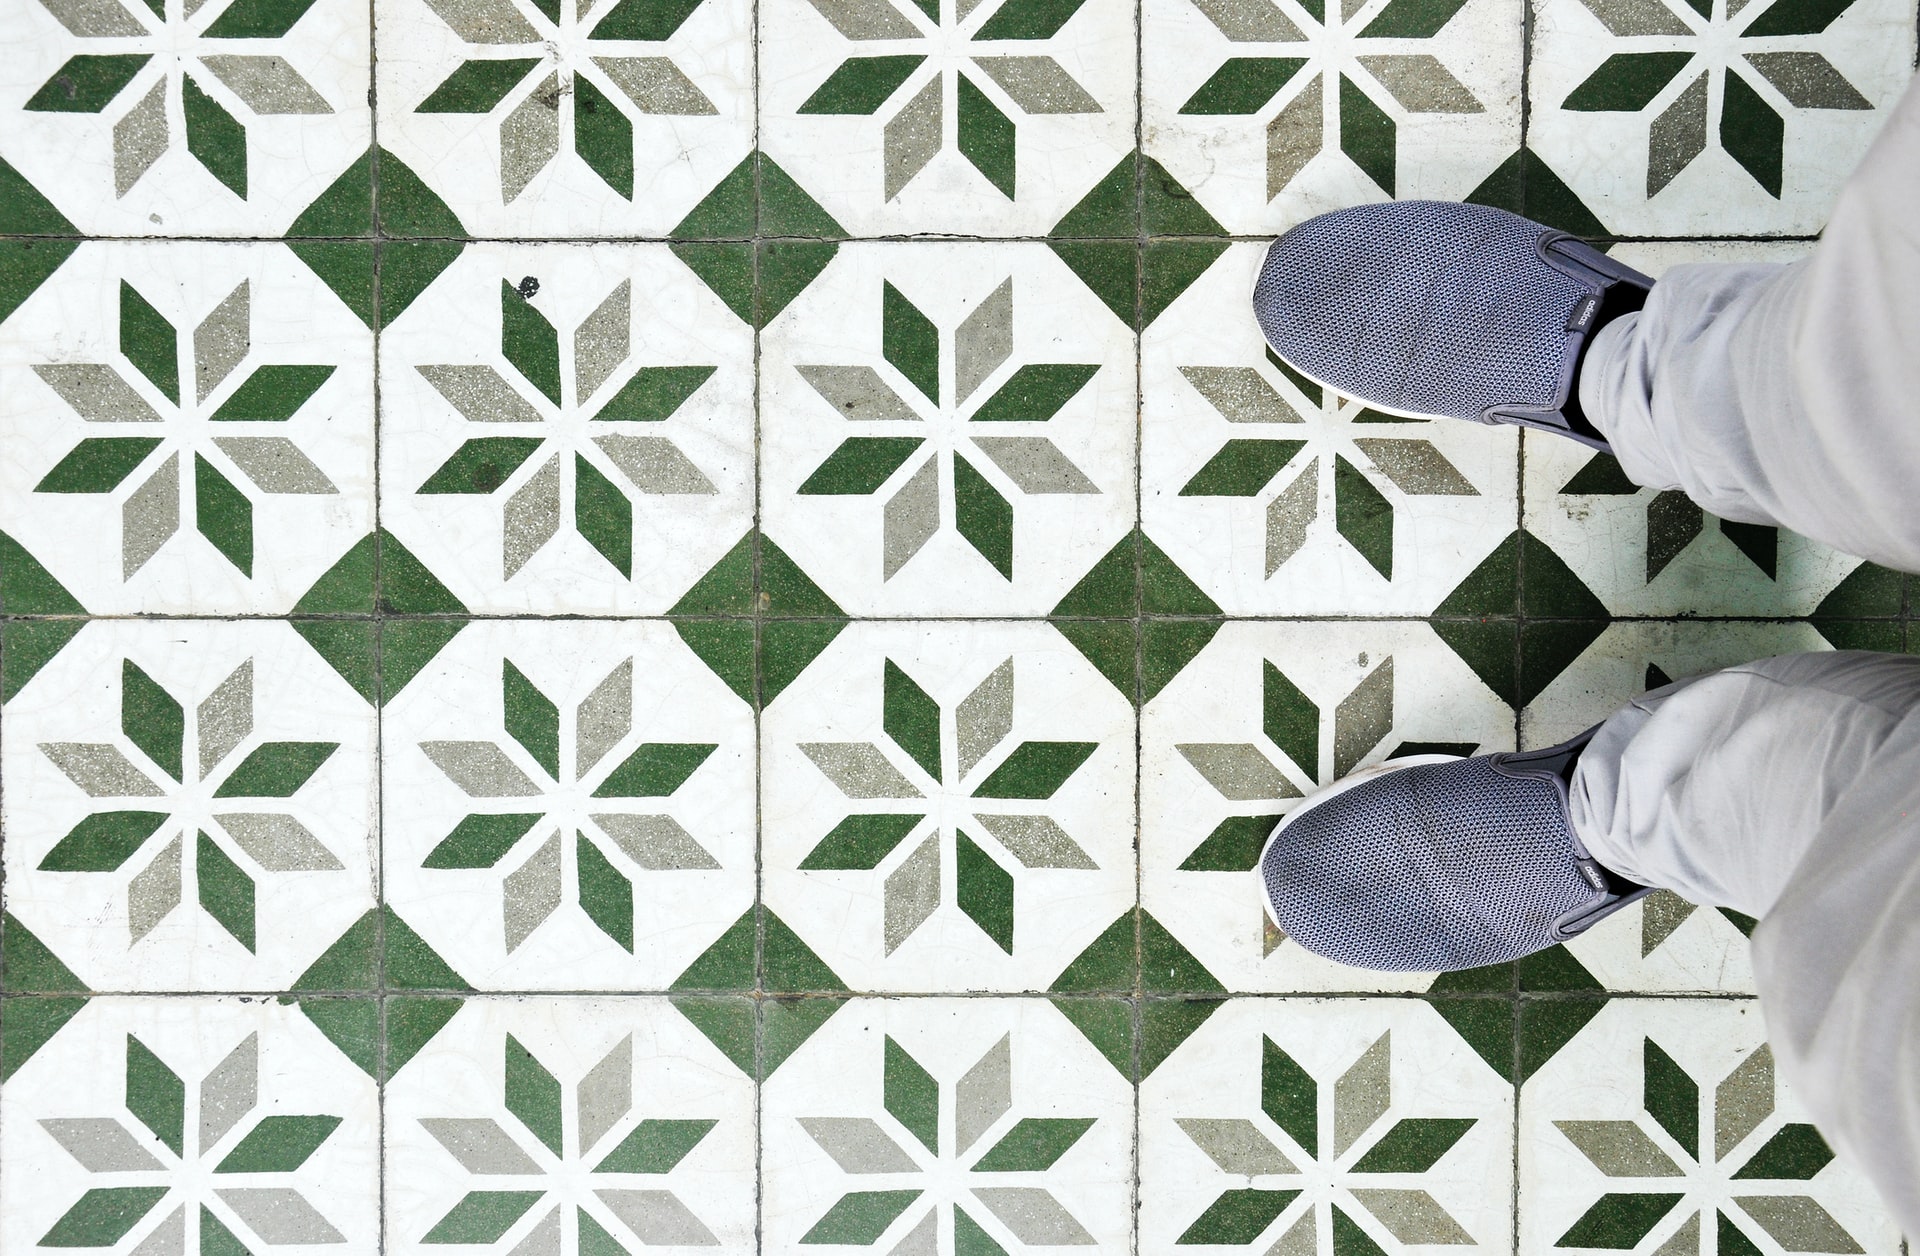 Where do patterned tiles fit in?